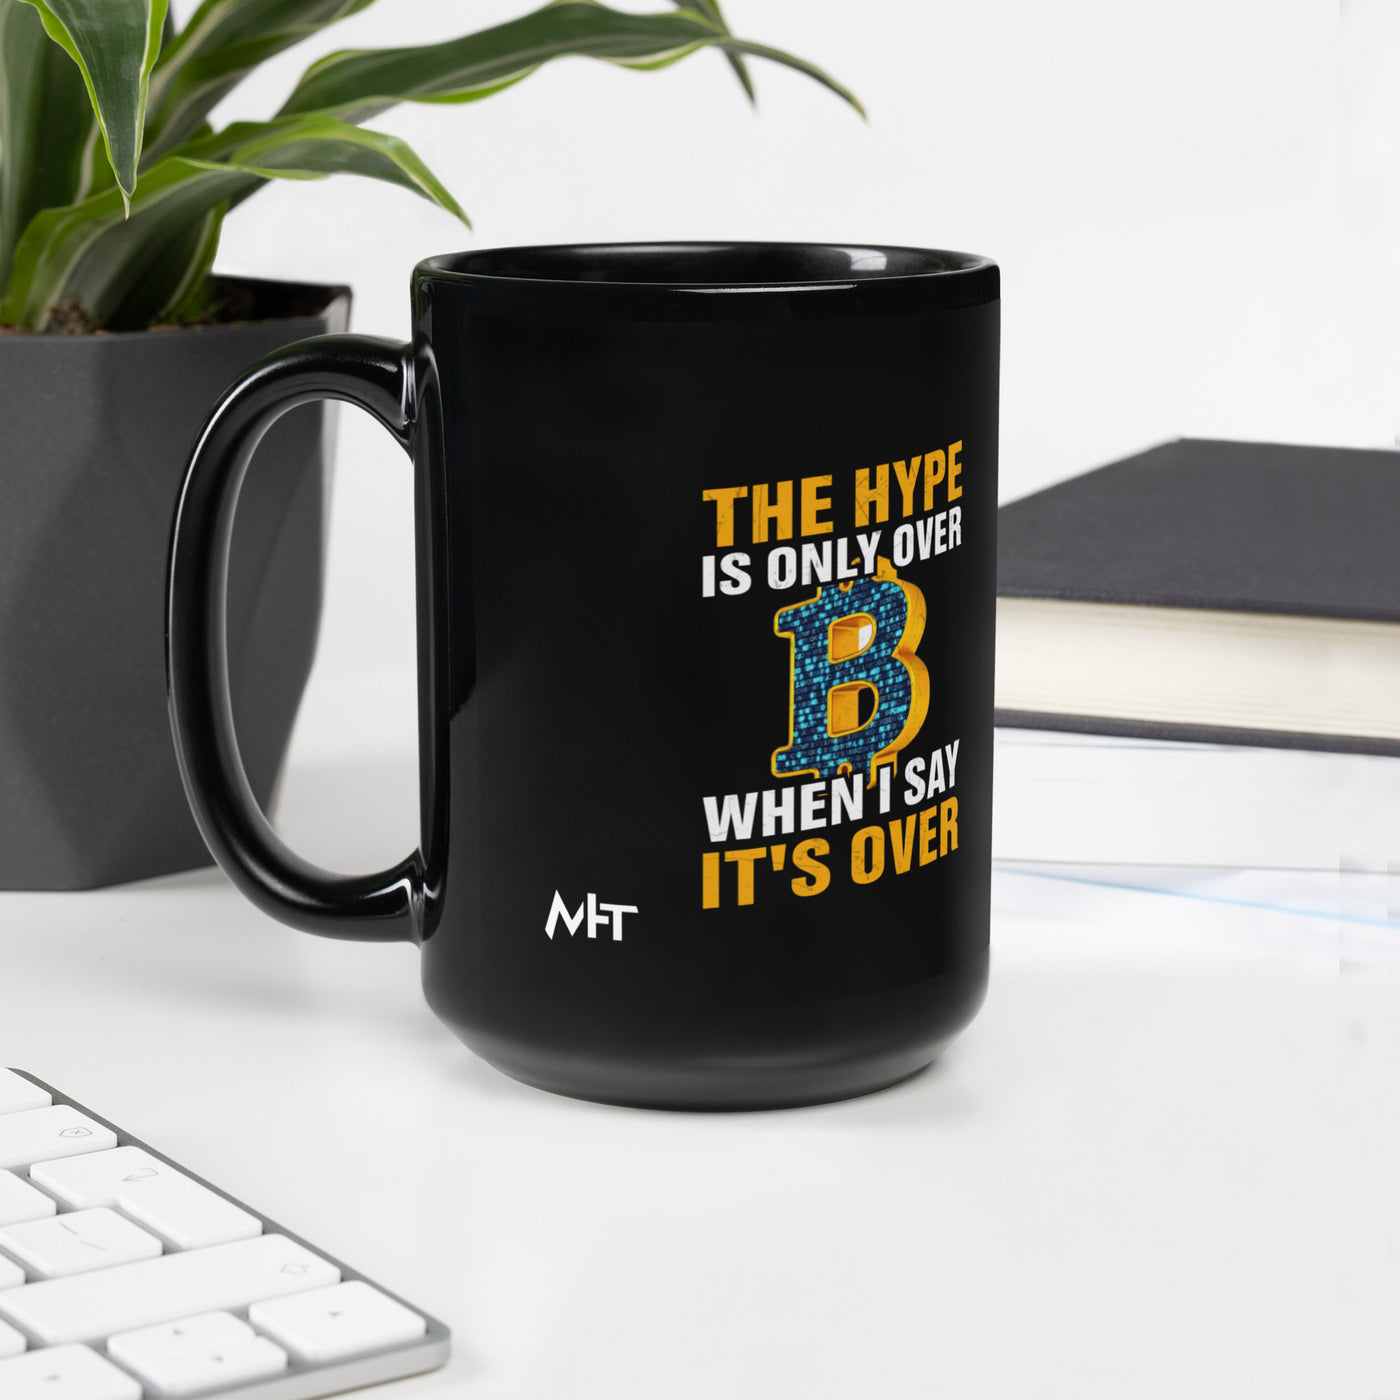 Bitcoin: The Hype is only over, when I said it's over - Black Glossy Mug